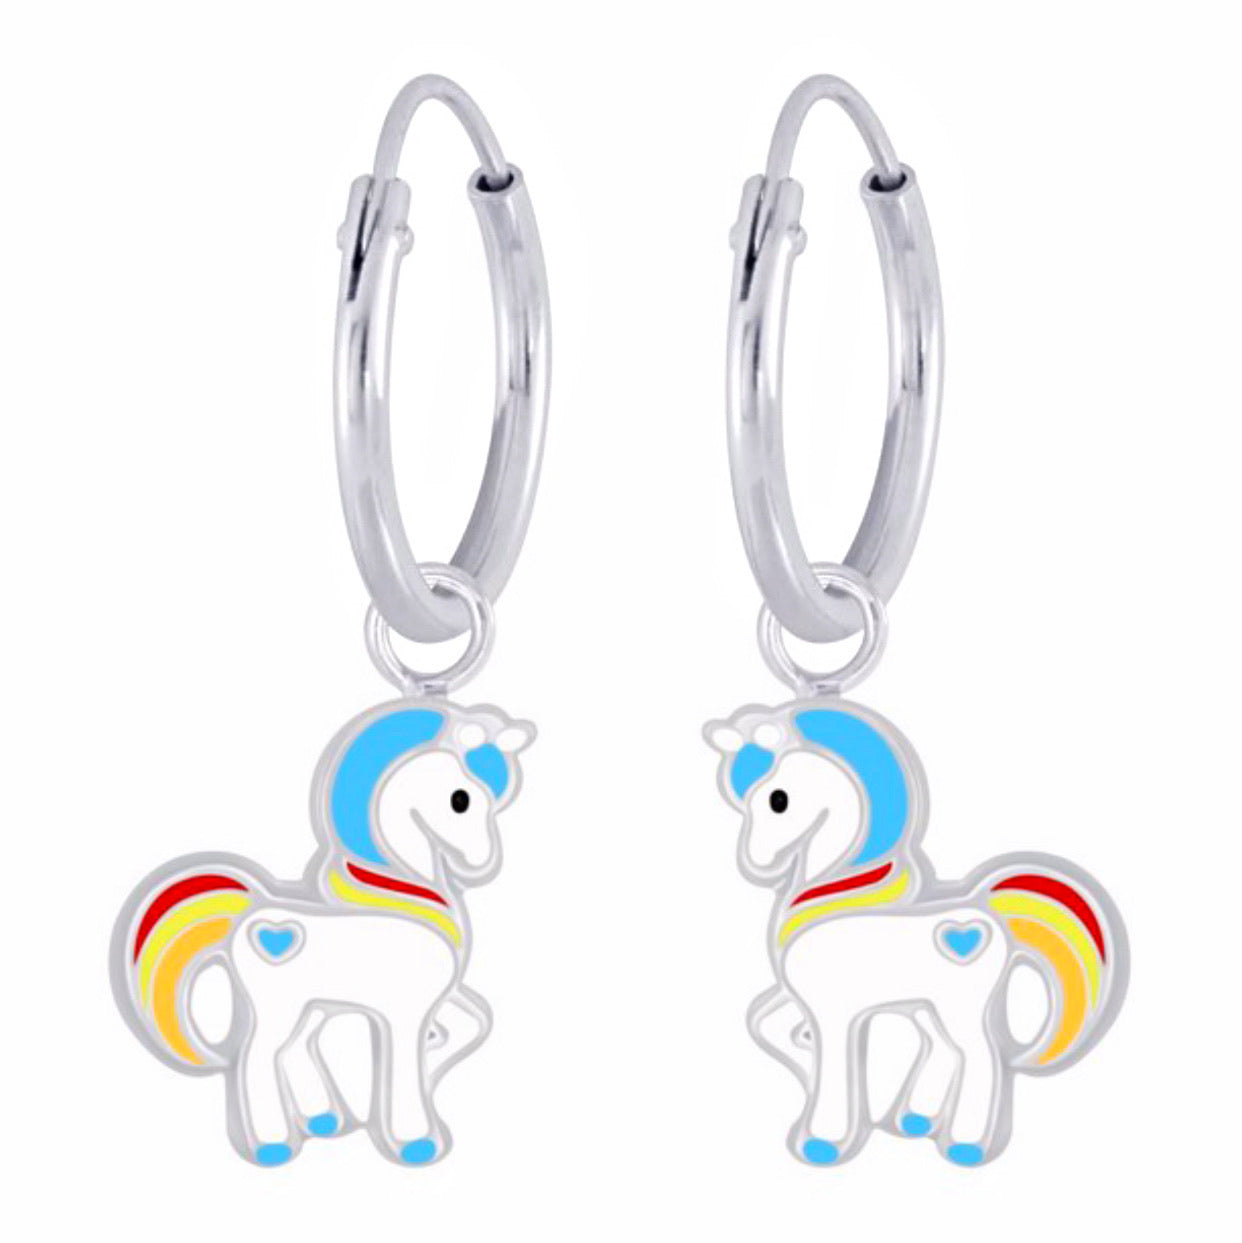 925 Sterling Silver Small Multicolour Unicorn With Heart Hoop Earrings For Kids, Teens - Forever Kids Jewelry